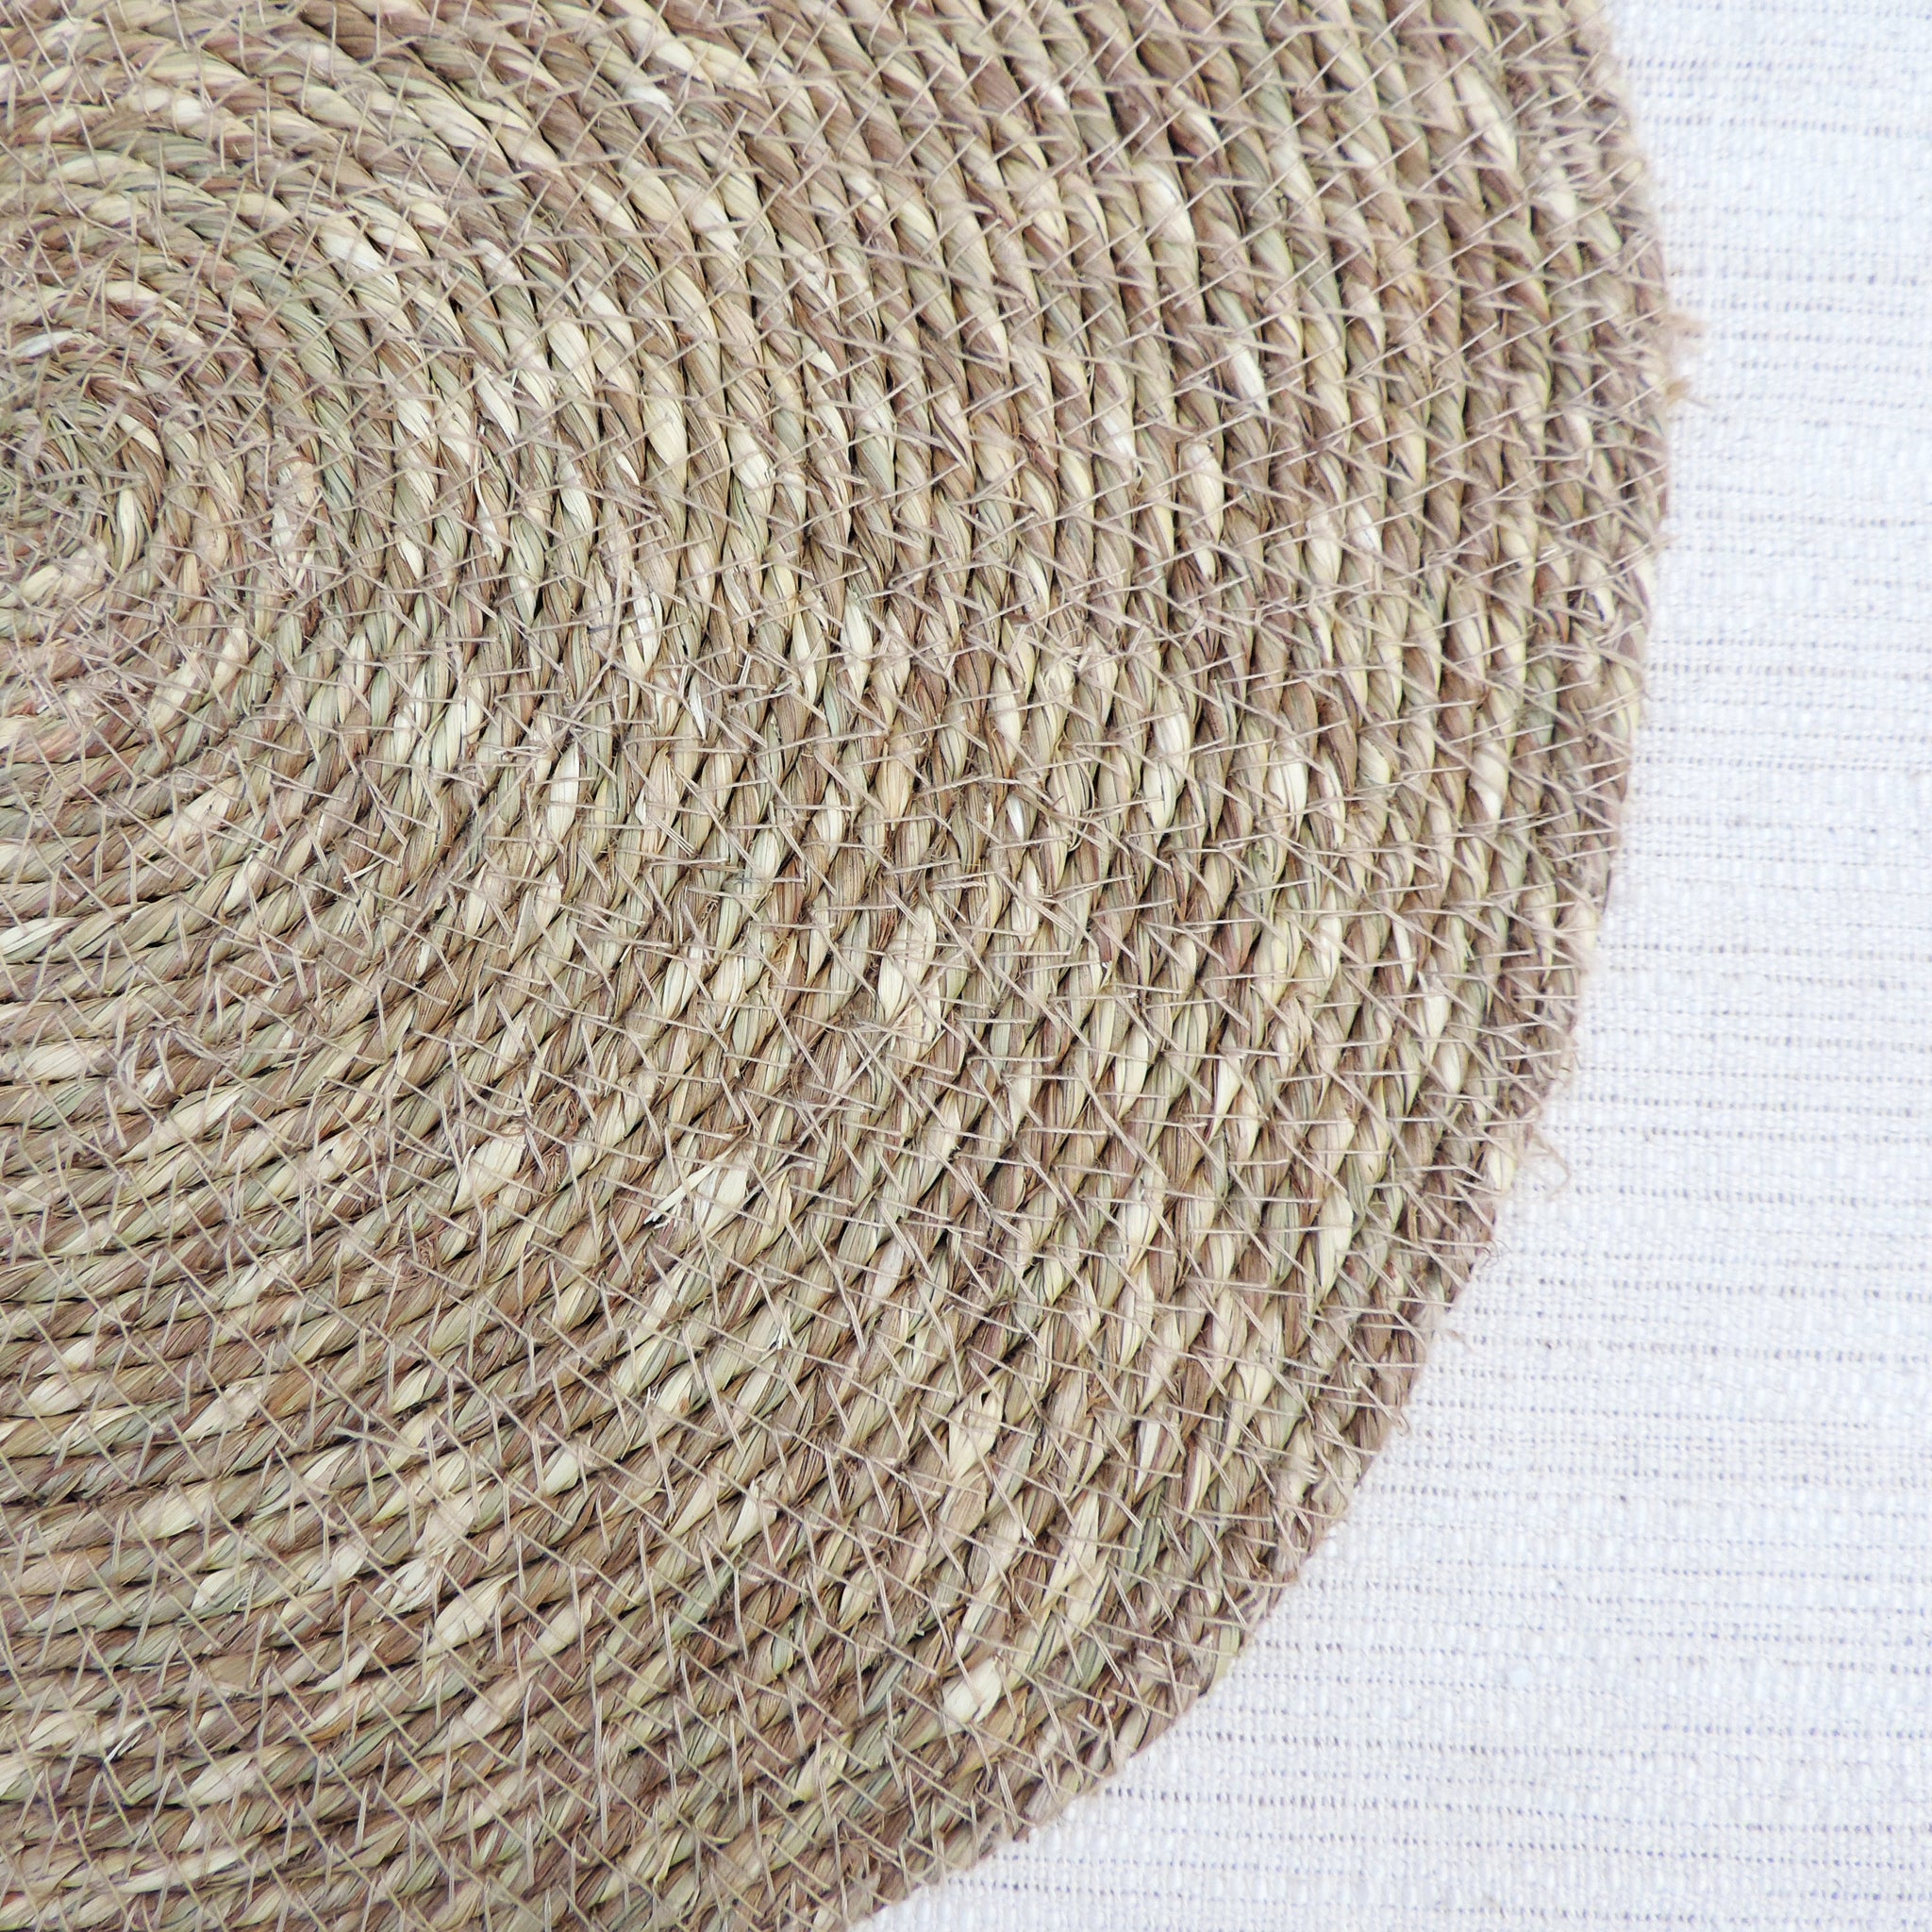 Trunkin' Natural Seagrass placemat set of 4 in basket